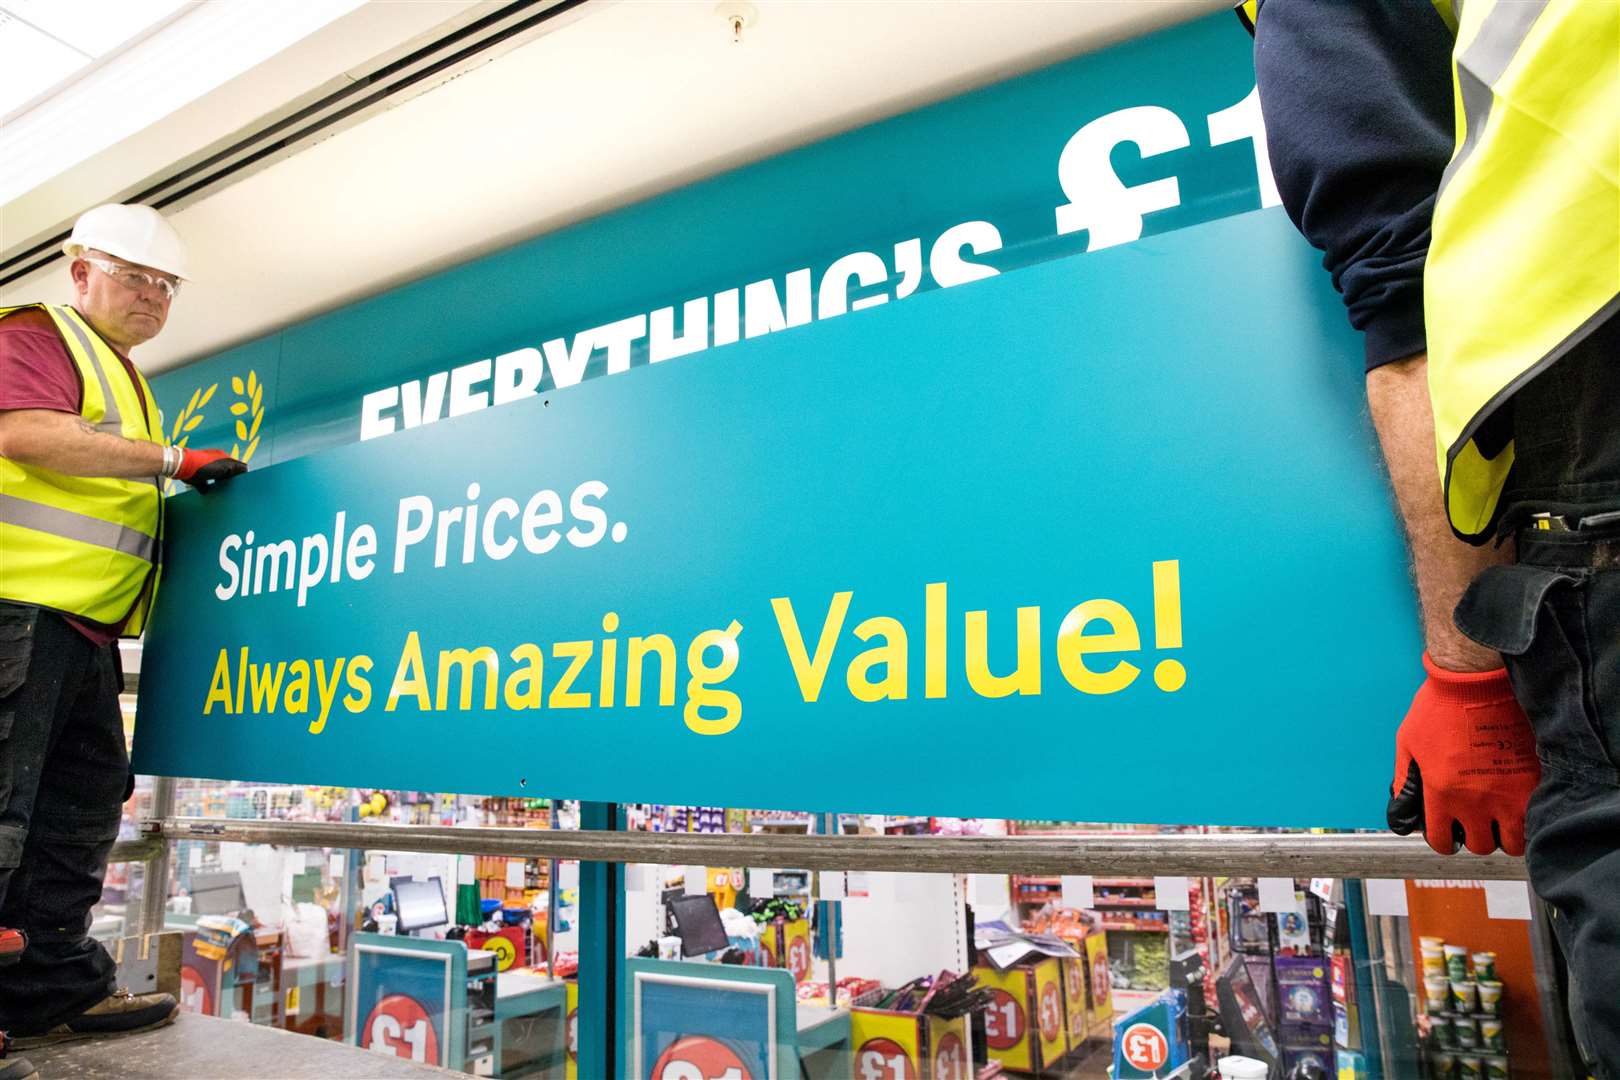 Poundland will not confirm it will be moving into Rainham